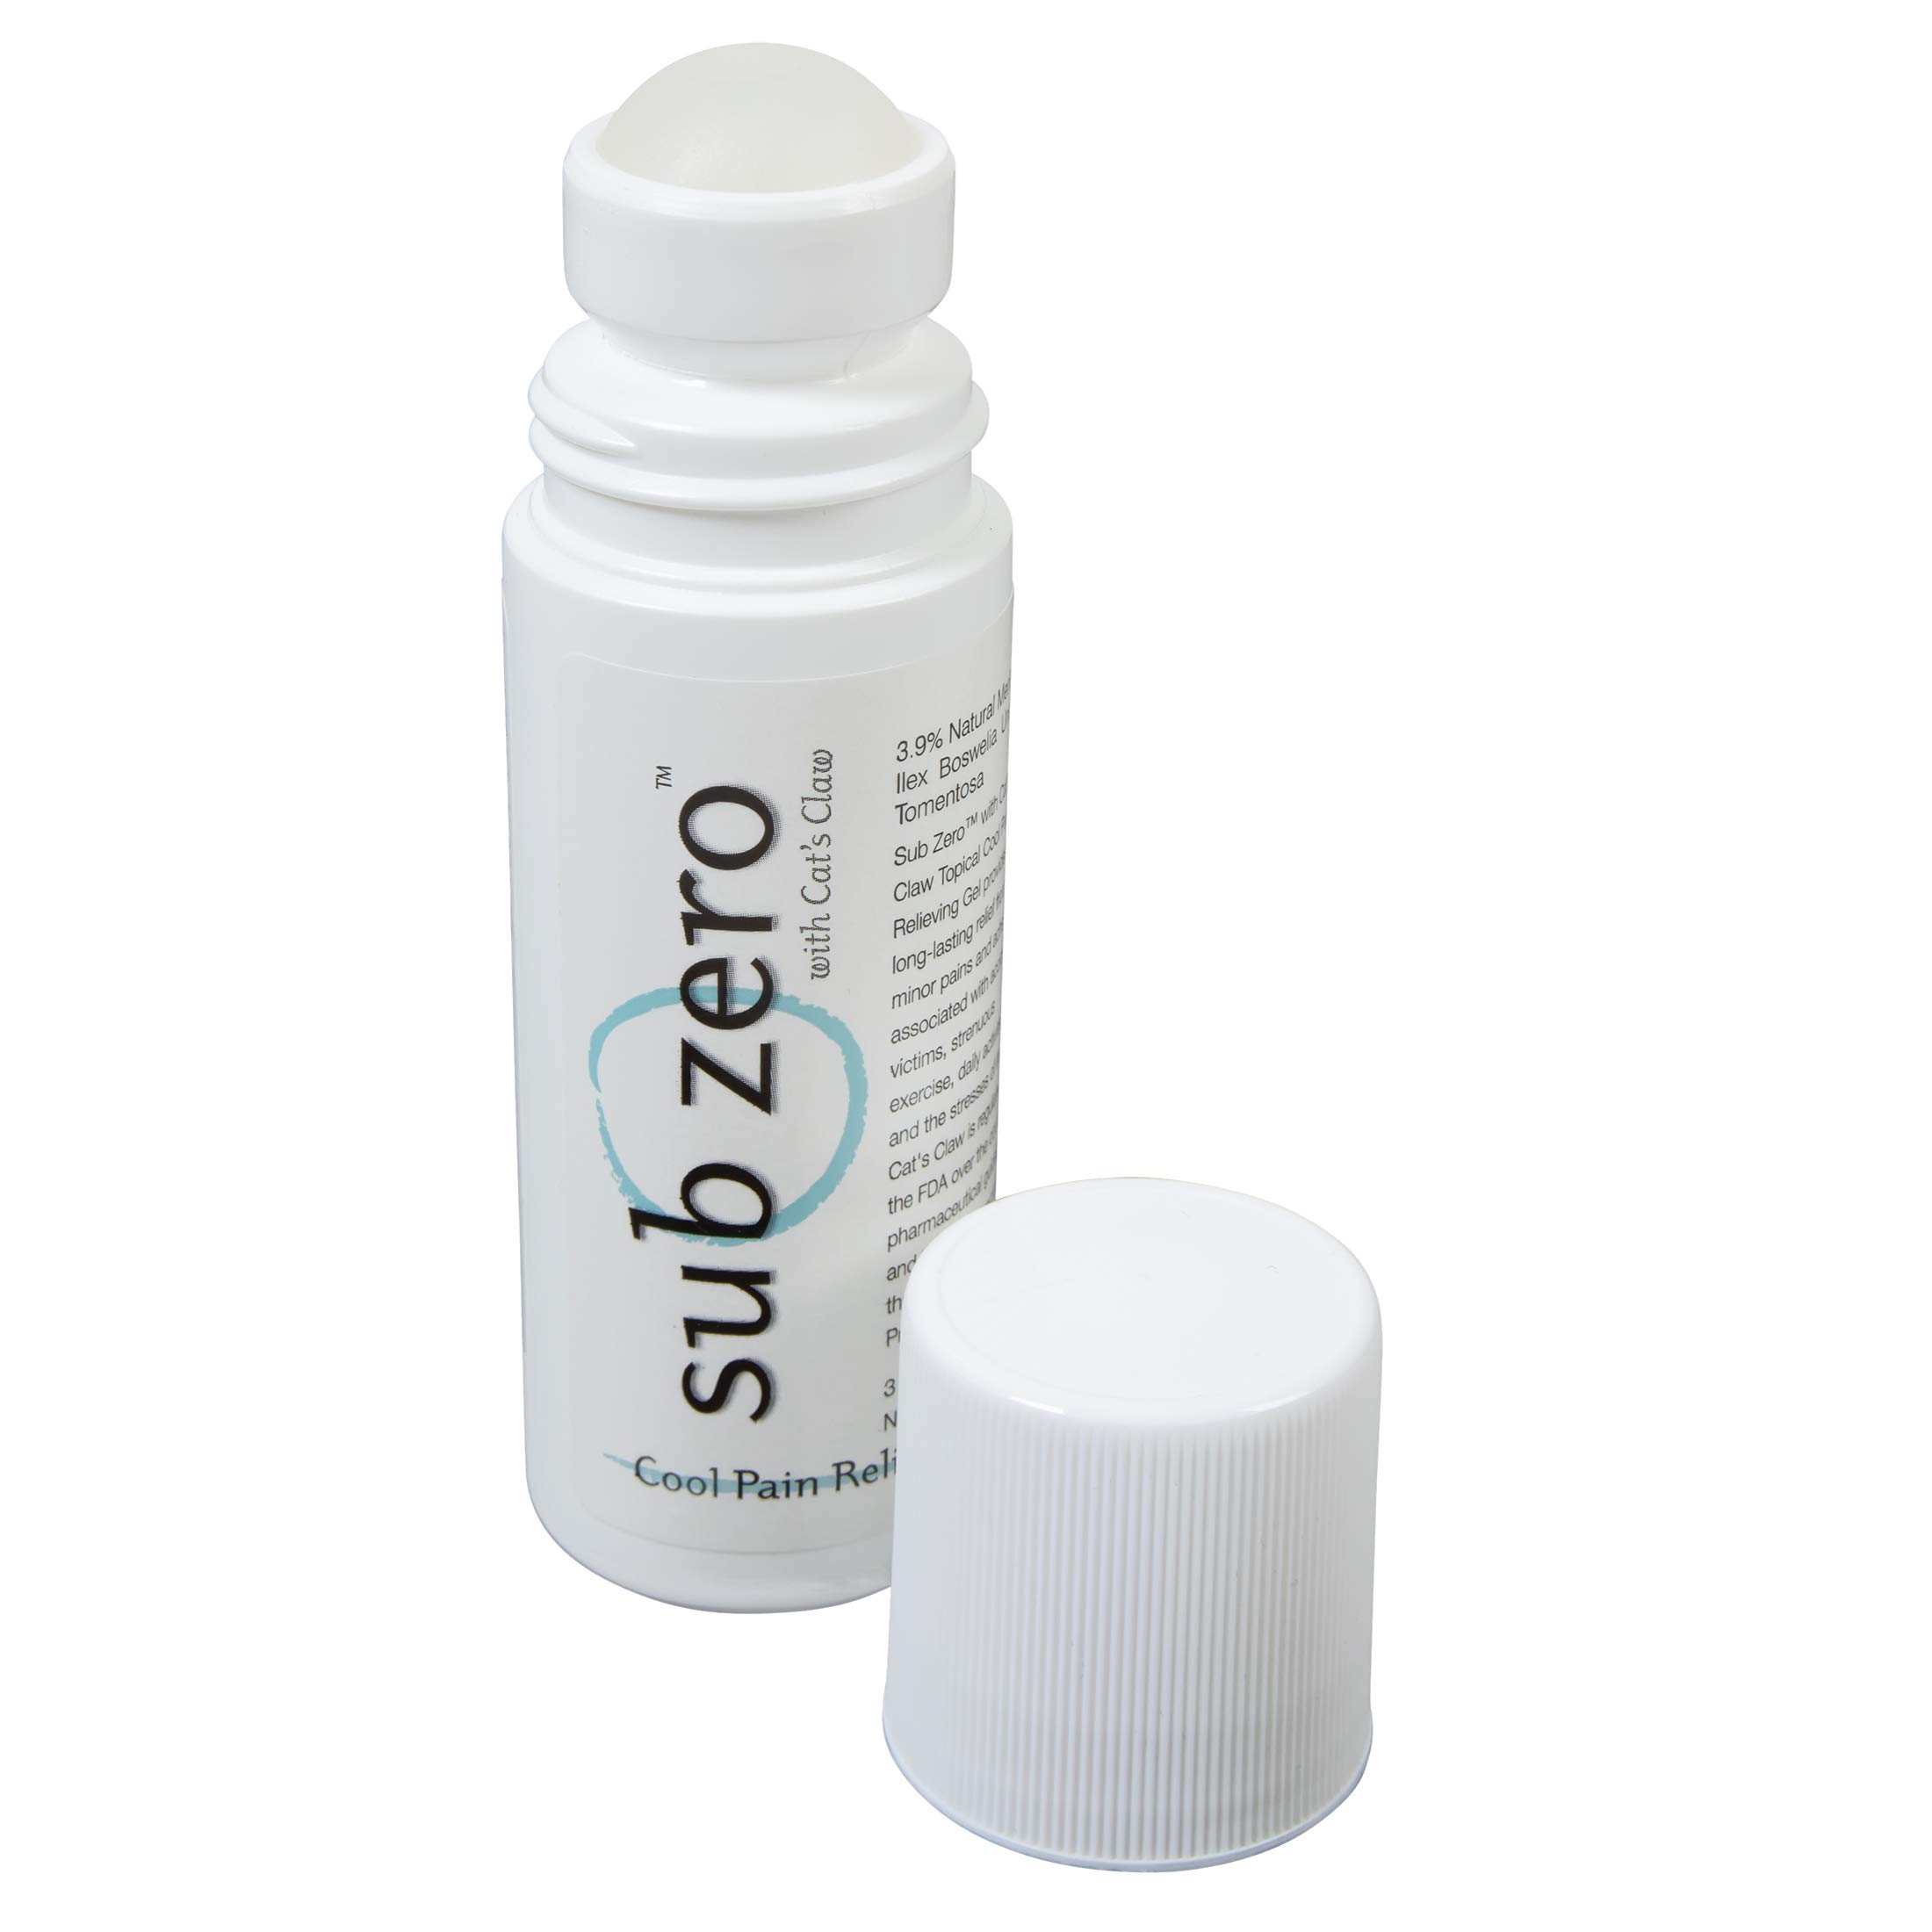 Sub Zero Cooling Pain Relief Gel 3oz Roll-On - Joint Relief and